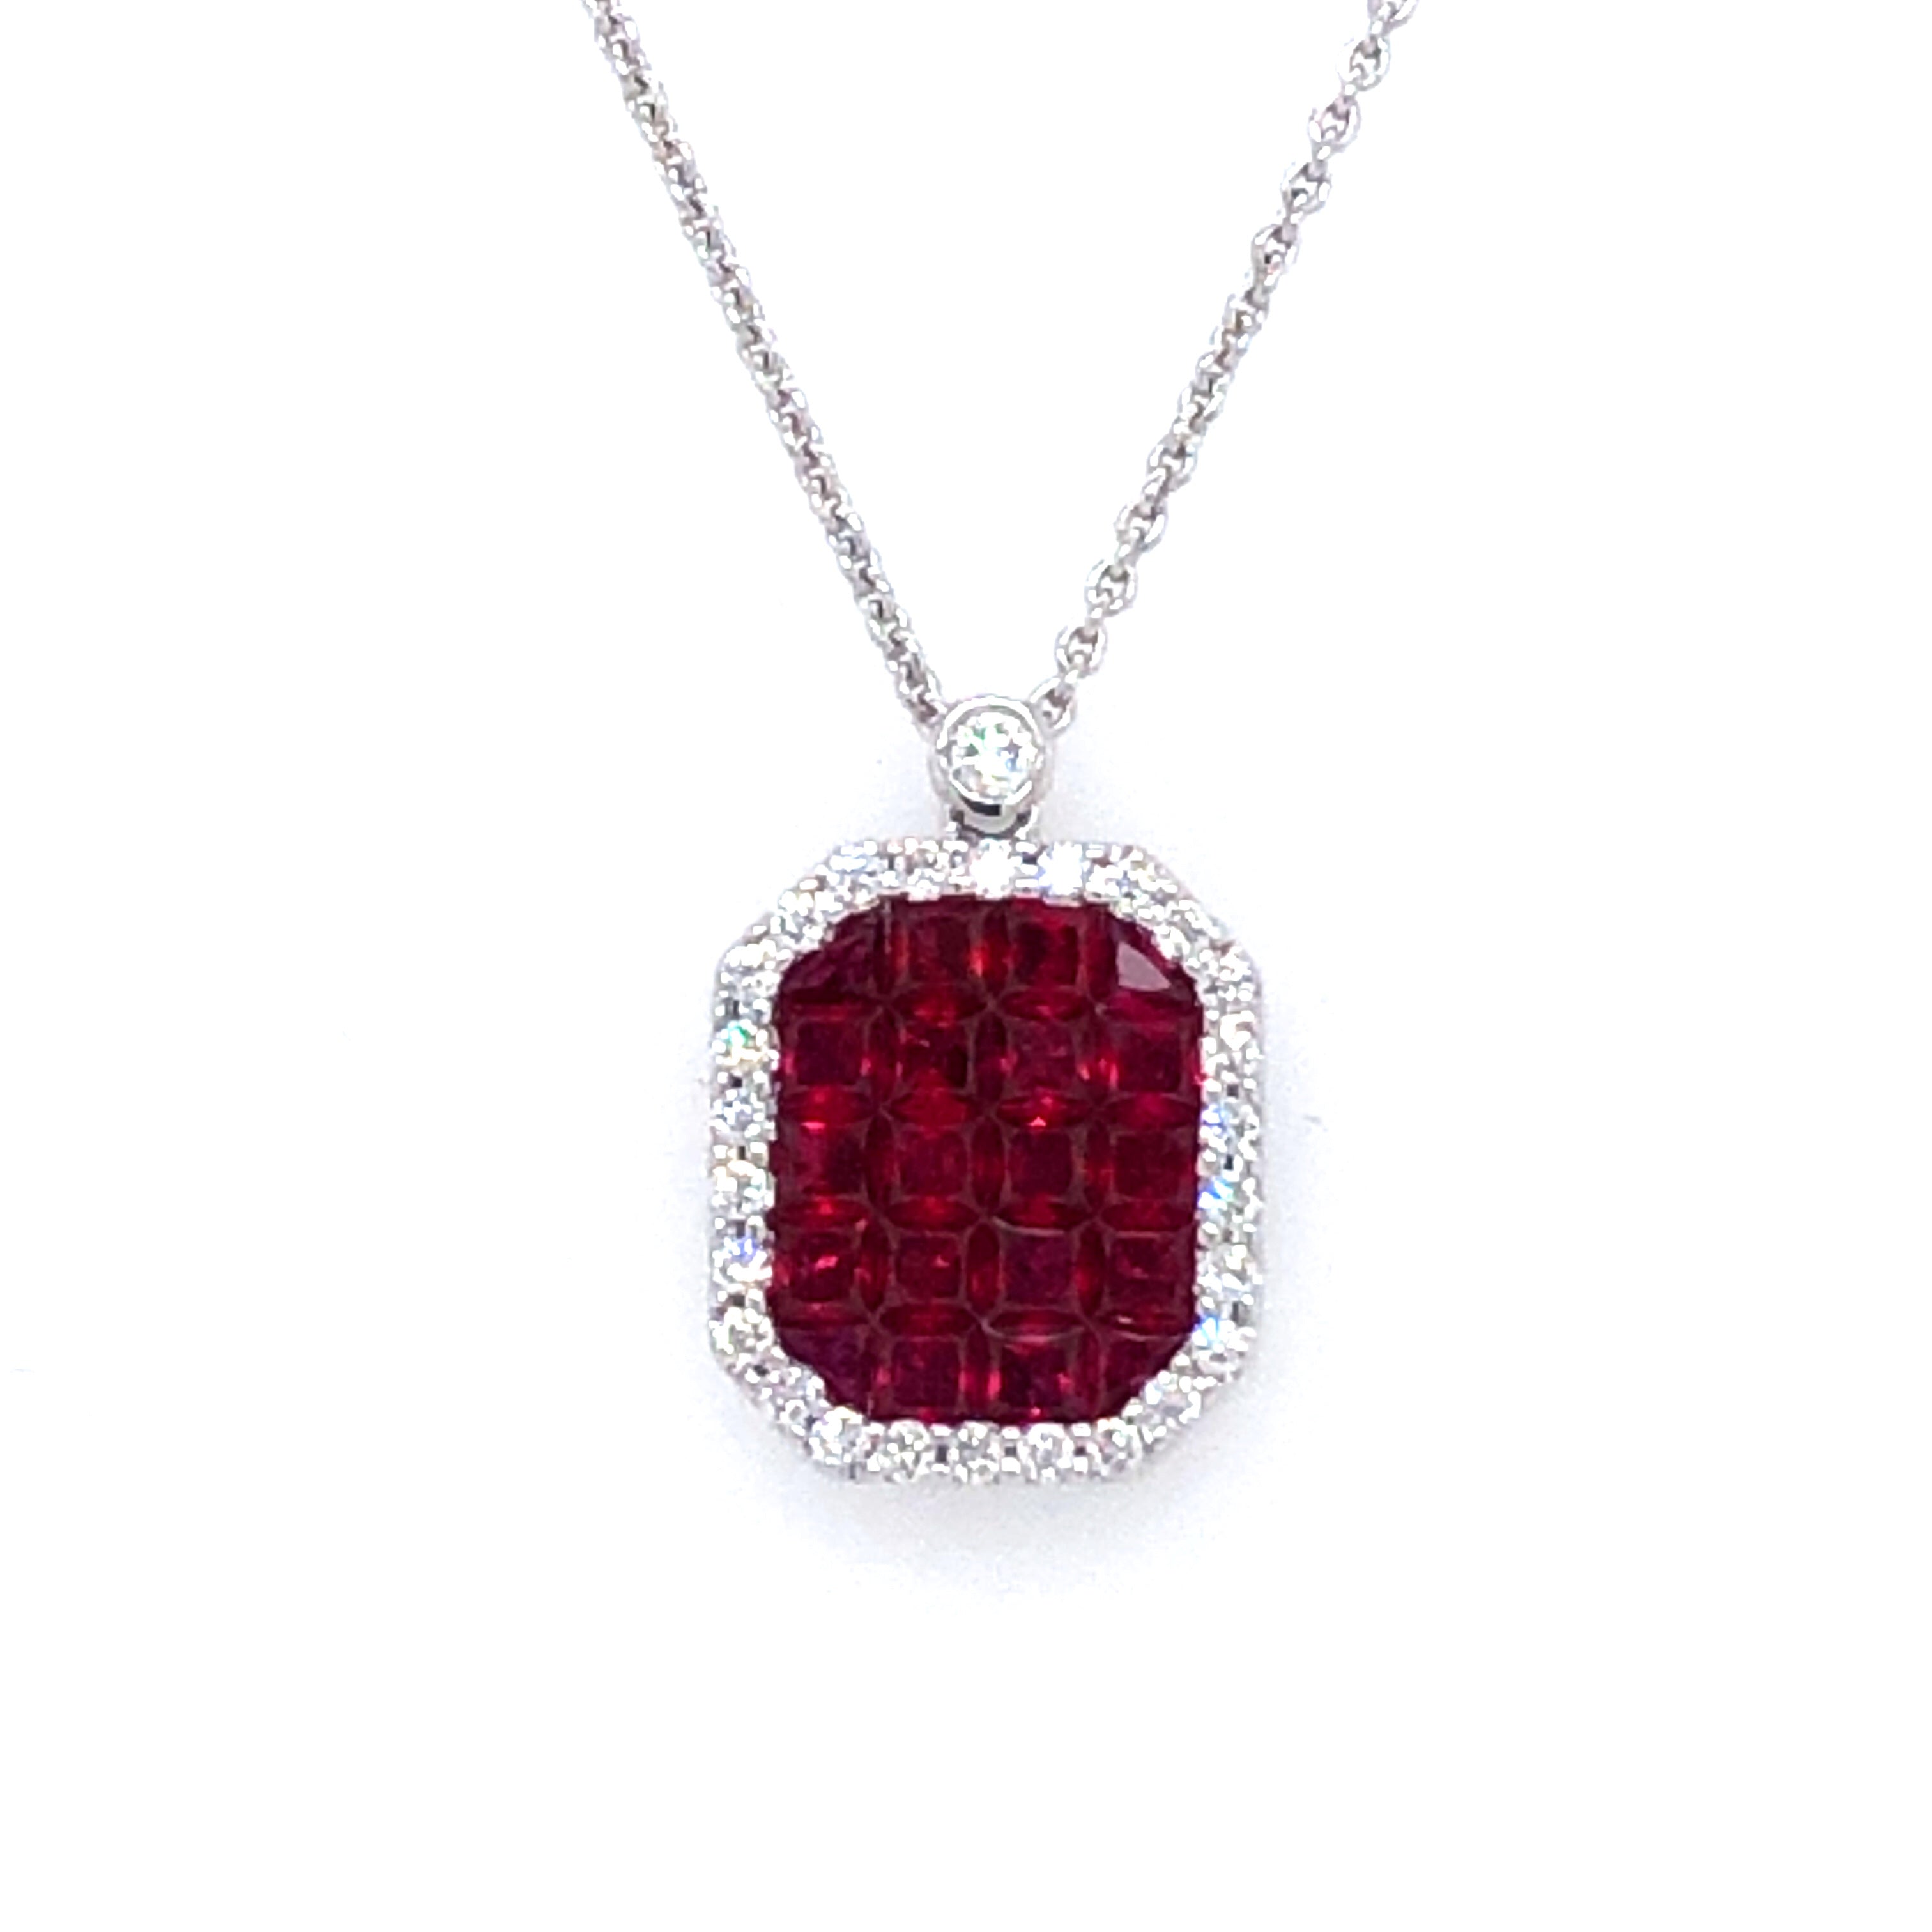 Statement Rubies Necklace - Colored Stone Necklace